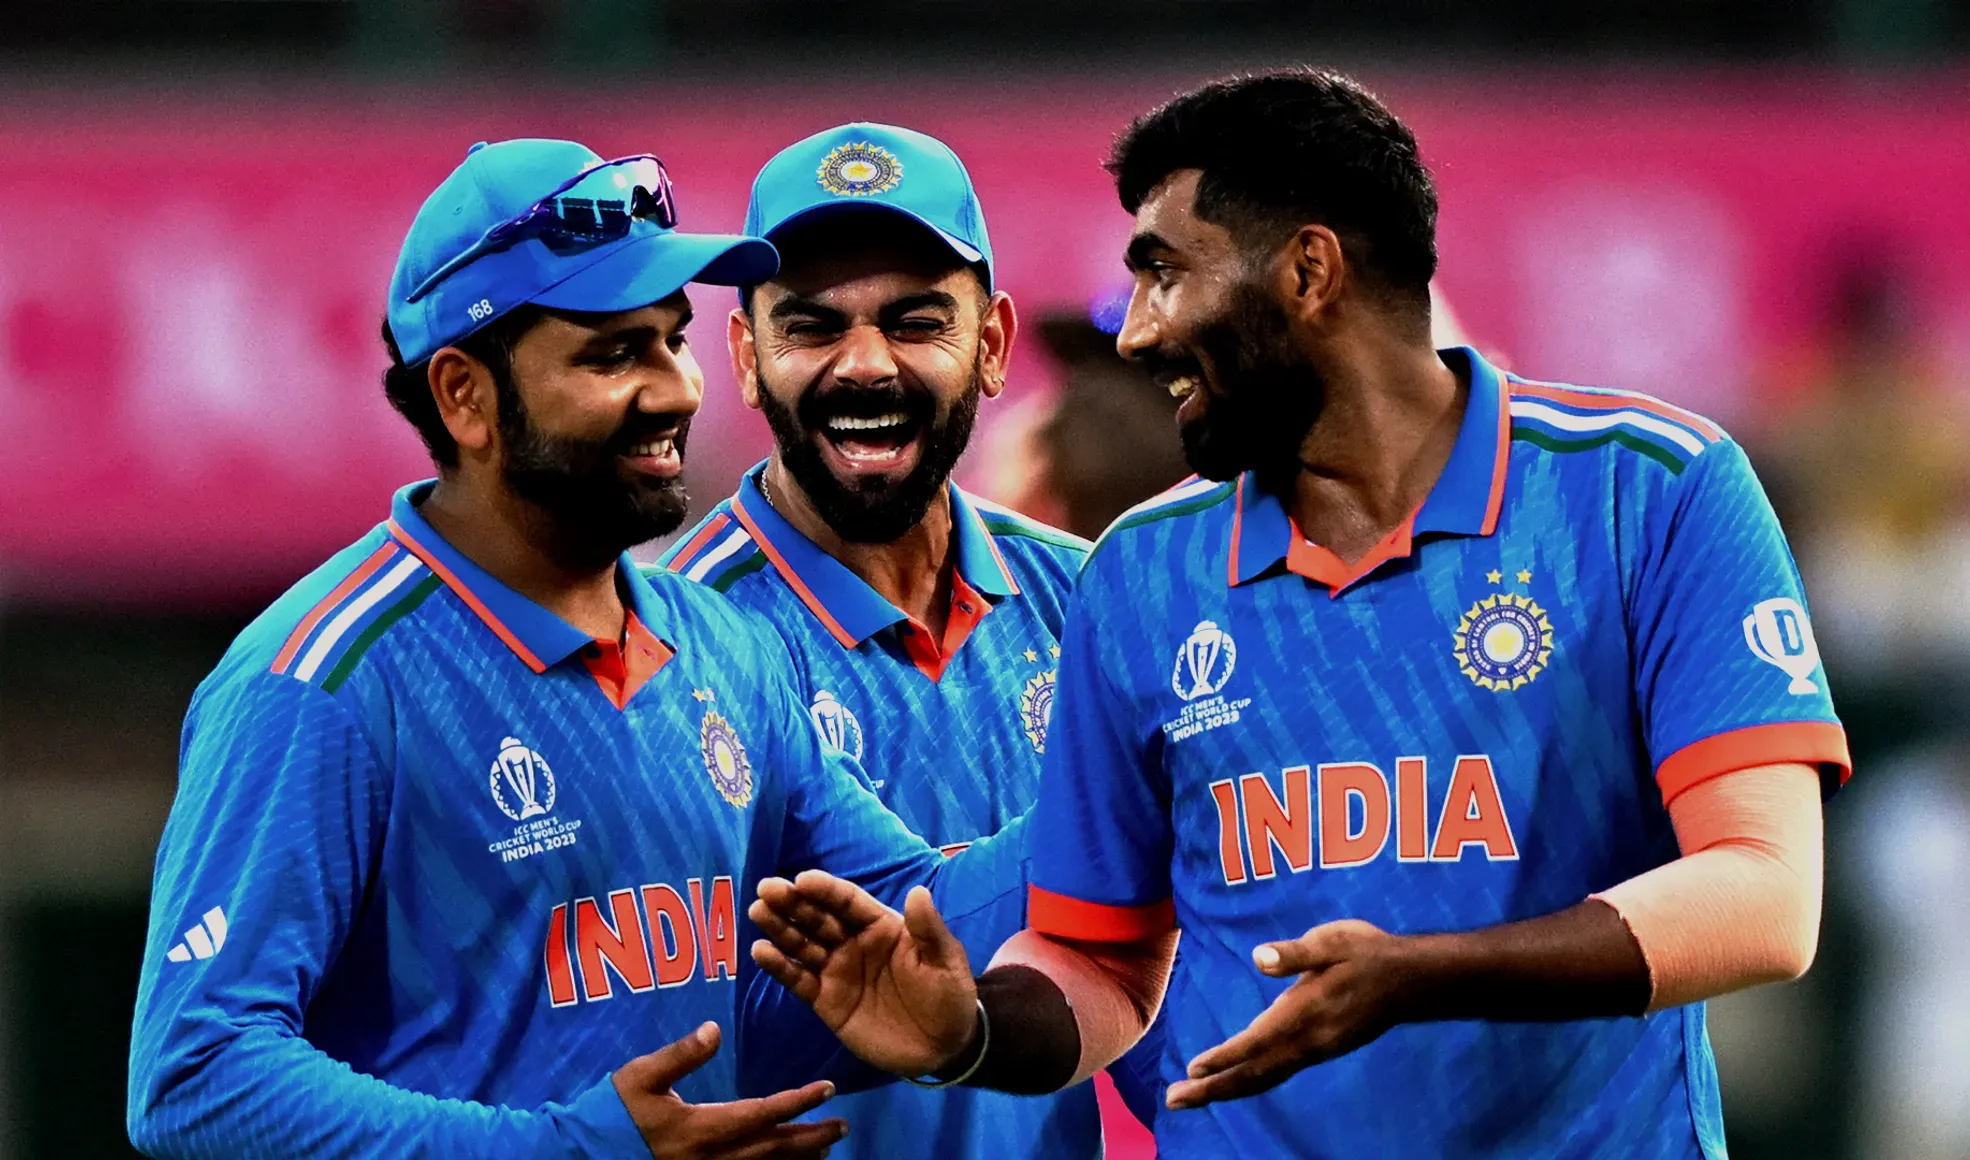 A Love Letter to Team India 💙